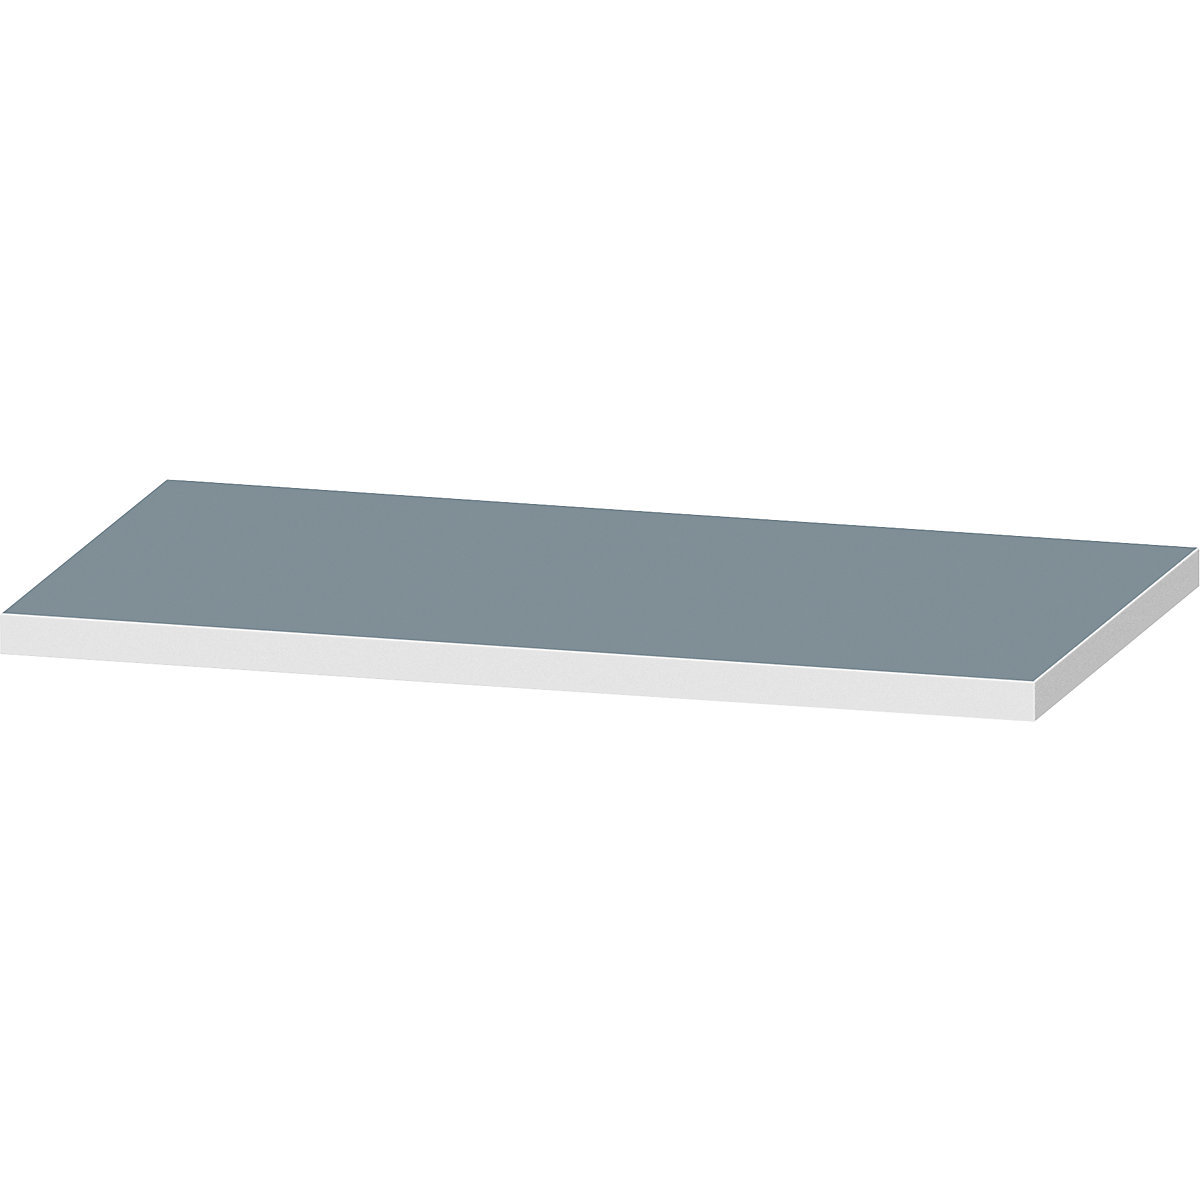 Worktop for workbench – ANKE, worktop with universal cover, width 1270 mm, thickness 50 mm-5